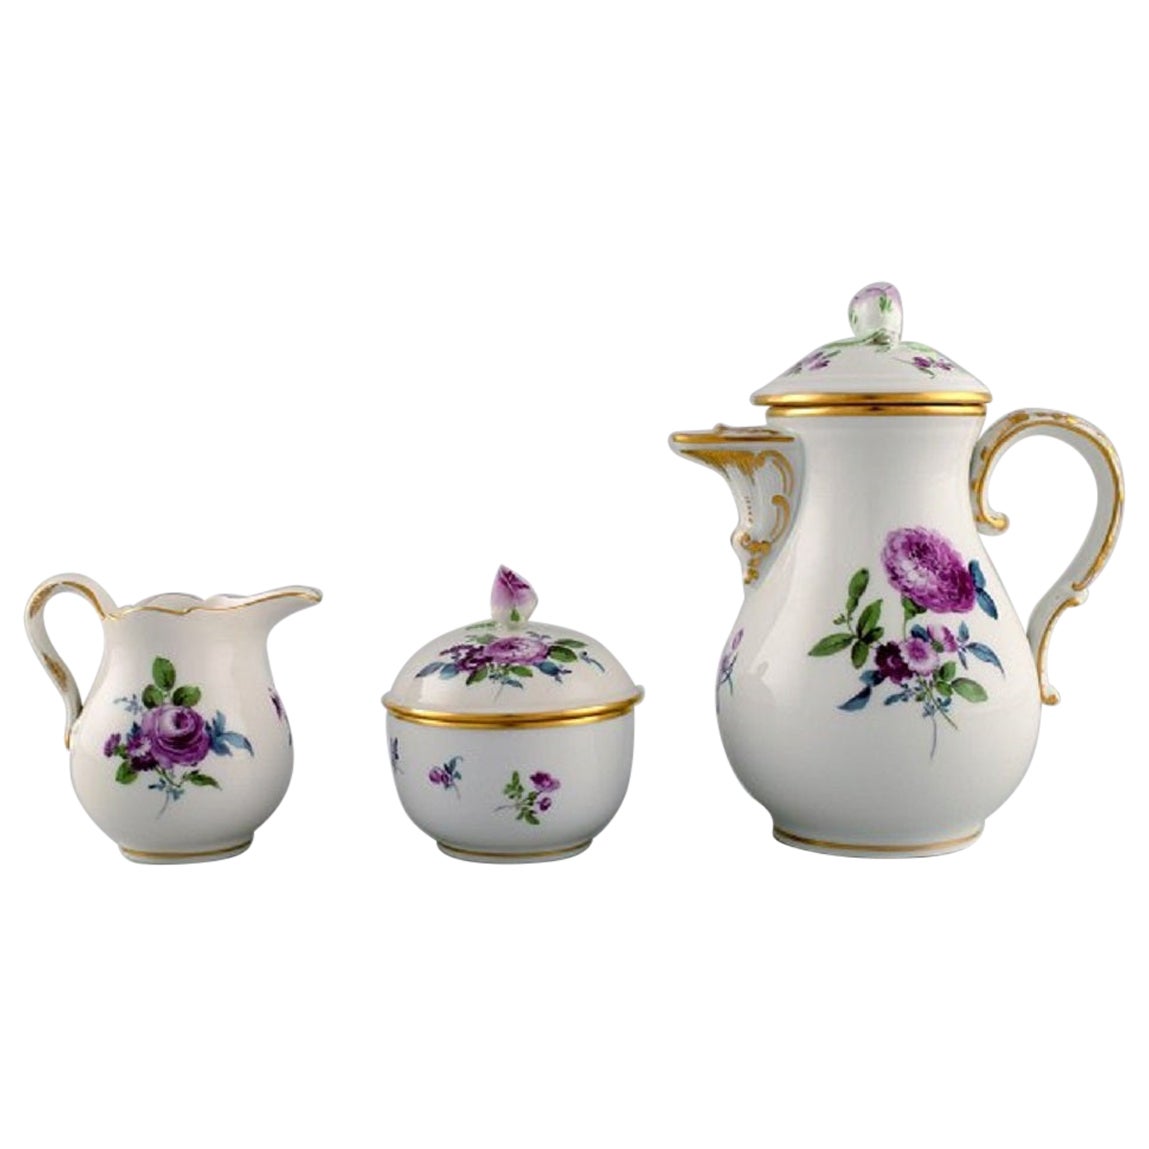 Meissen Coffee Pot, Sugar Bowl and Cream Jug with Hand-Painted Flowers